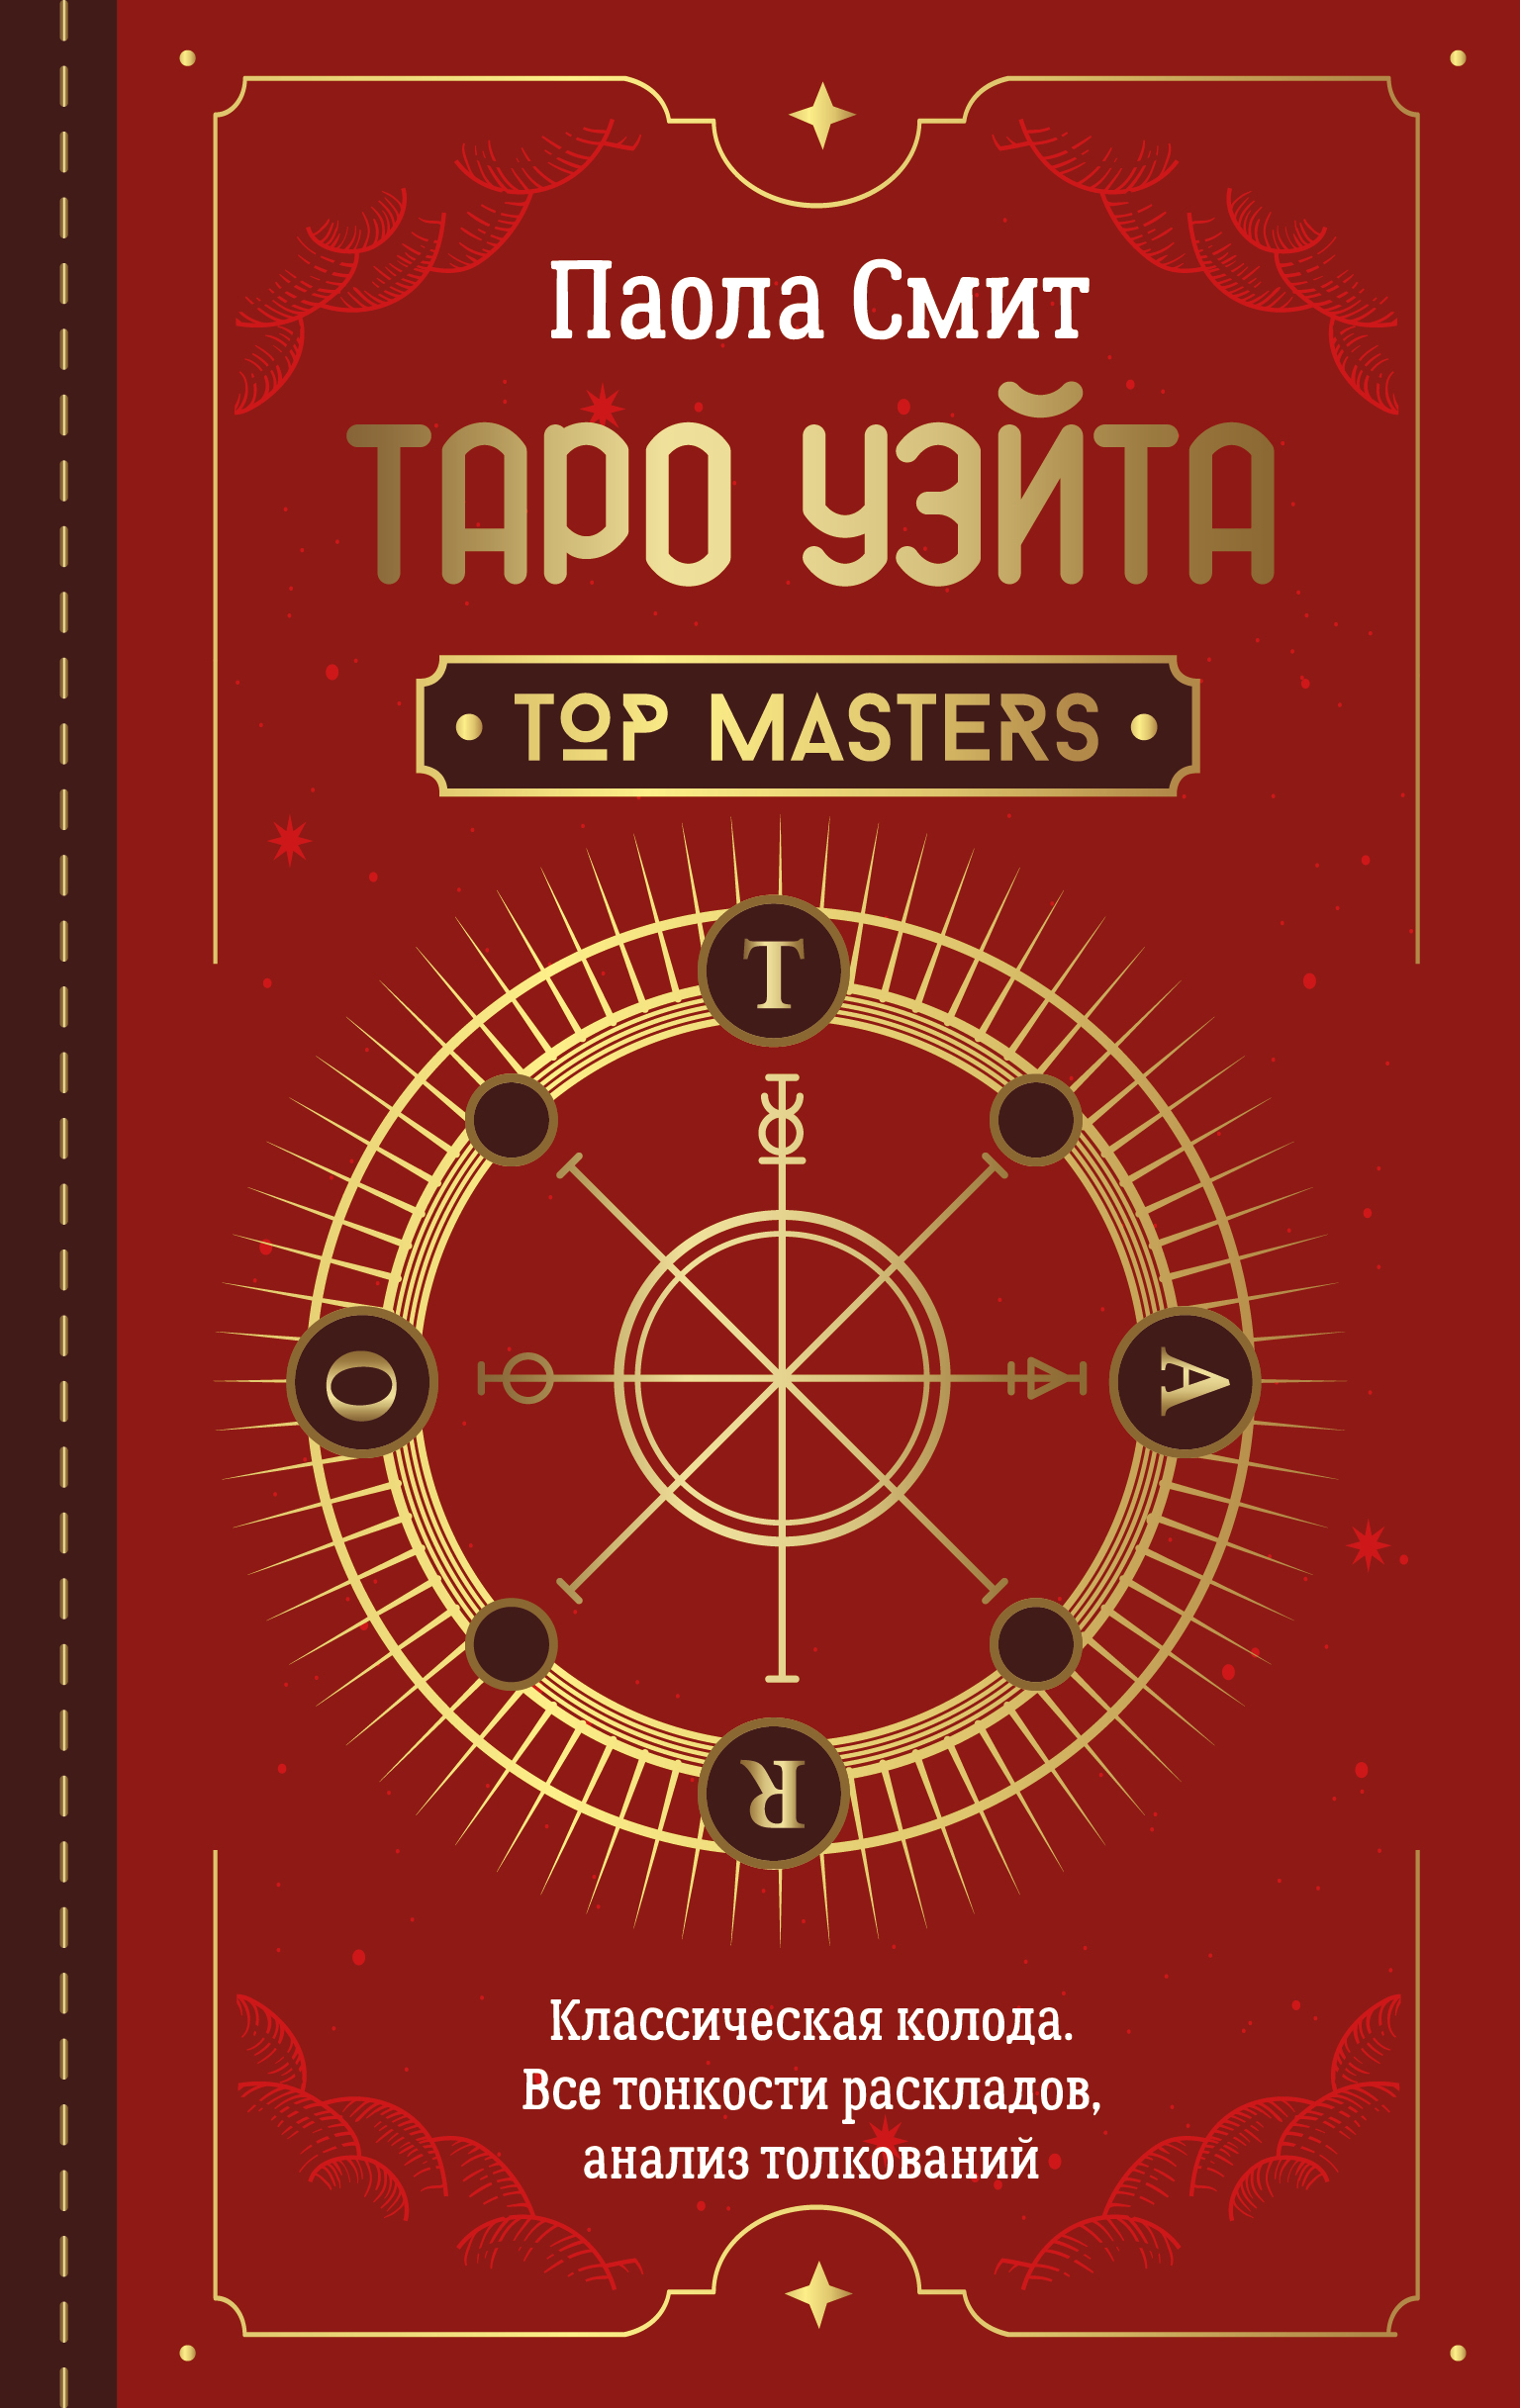  .  . Top Masters.  .   ,   